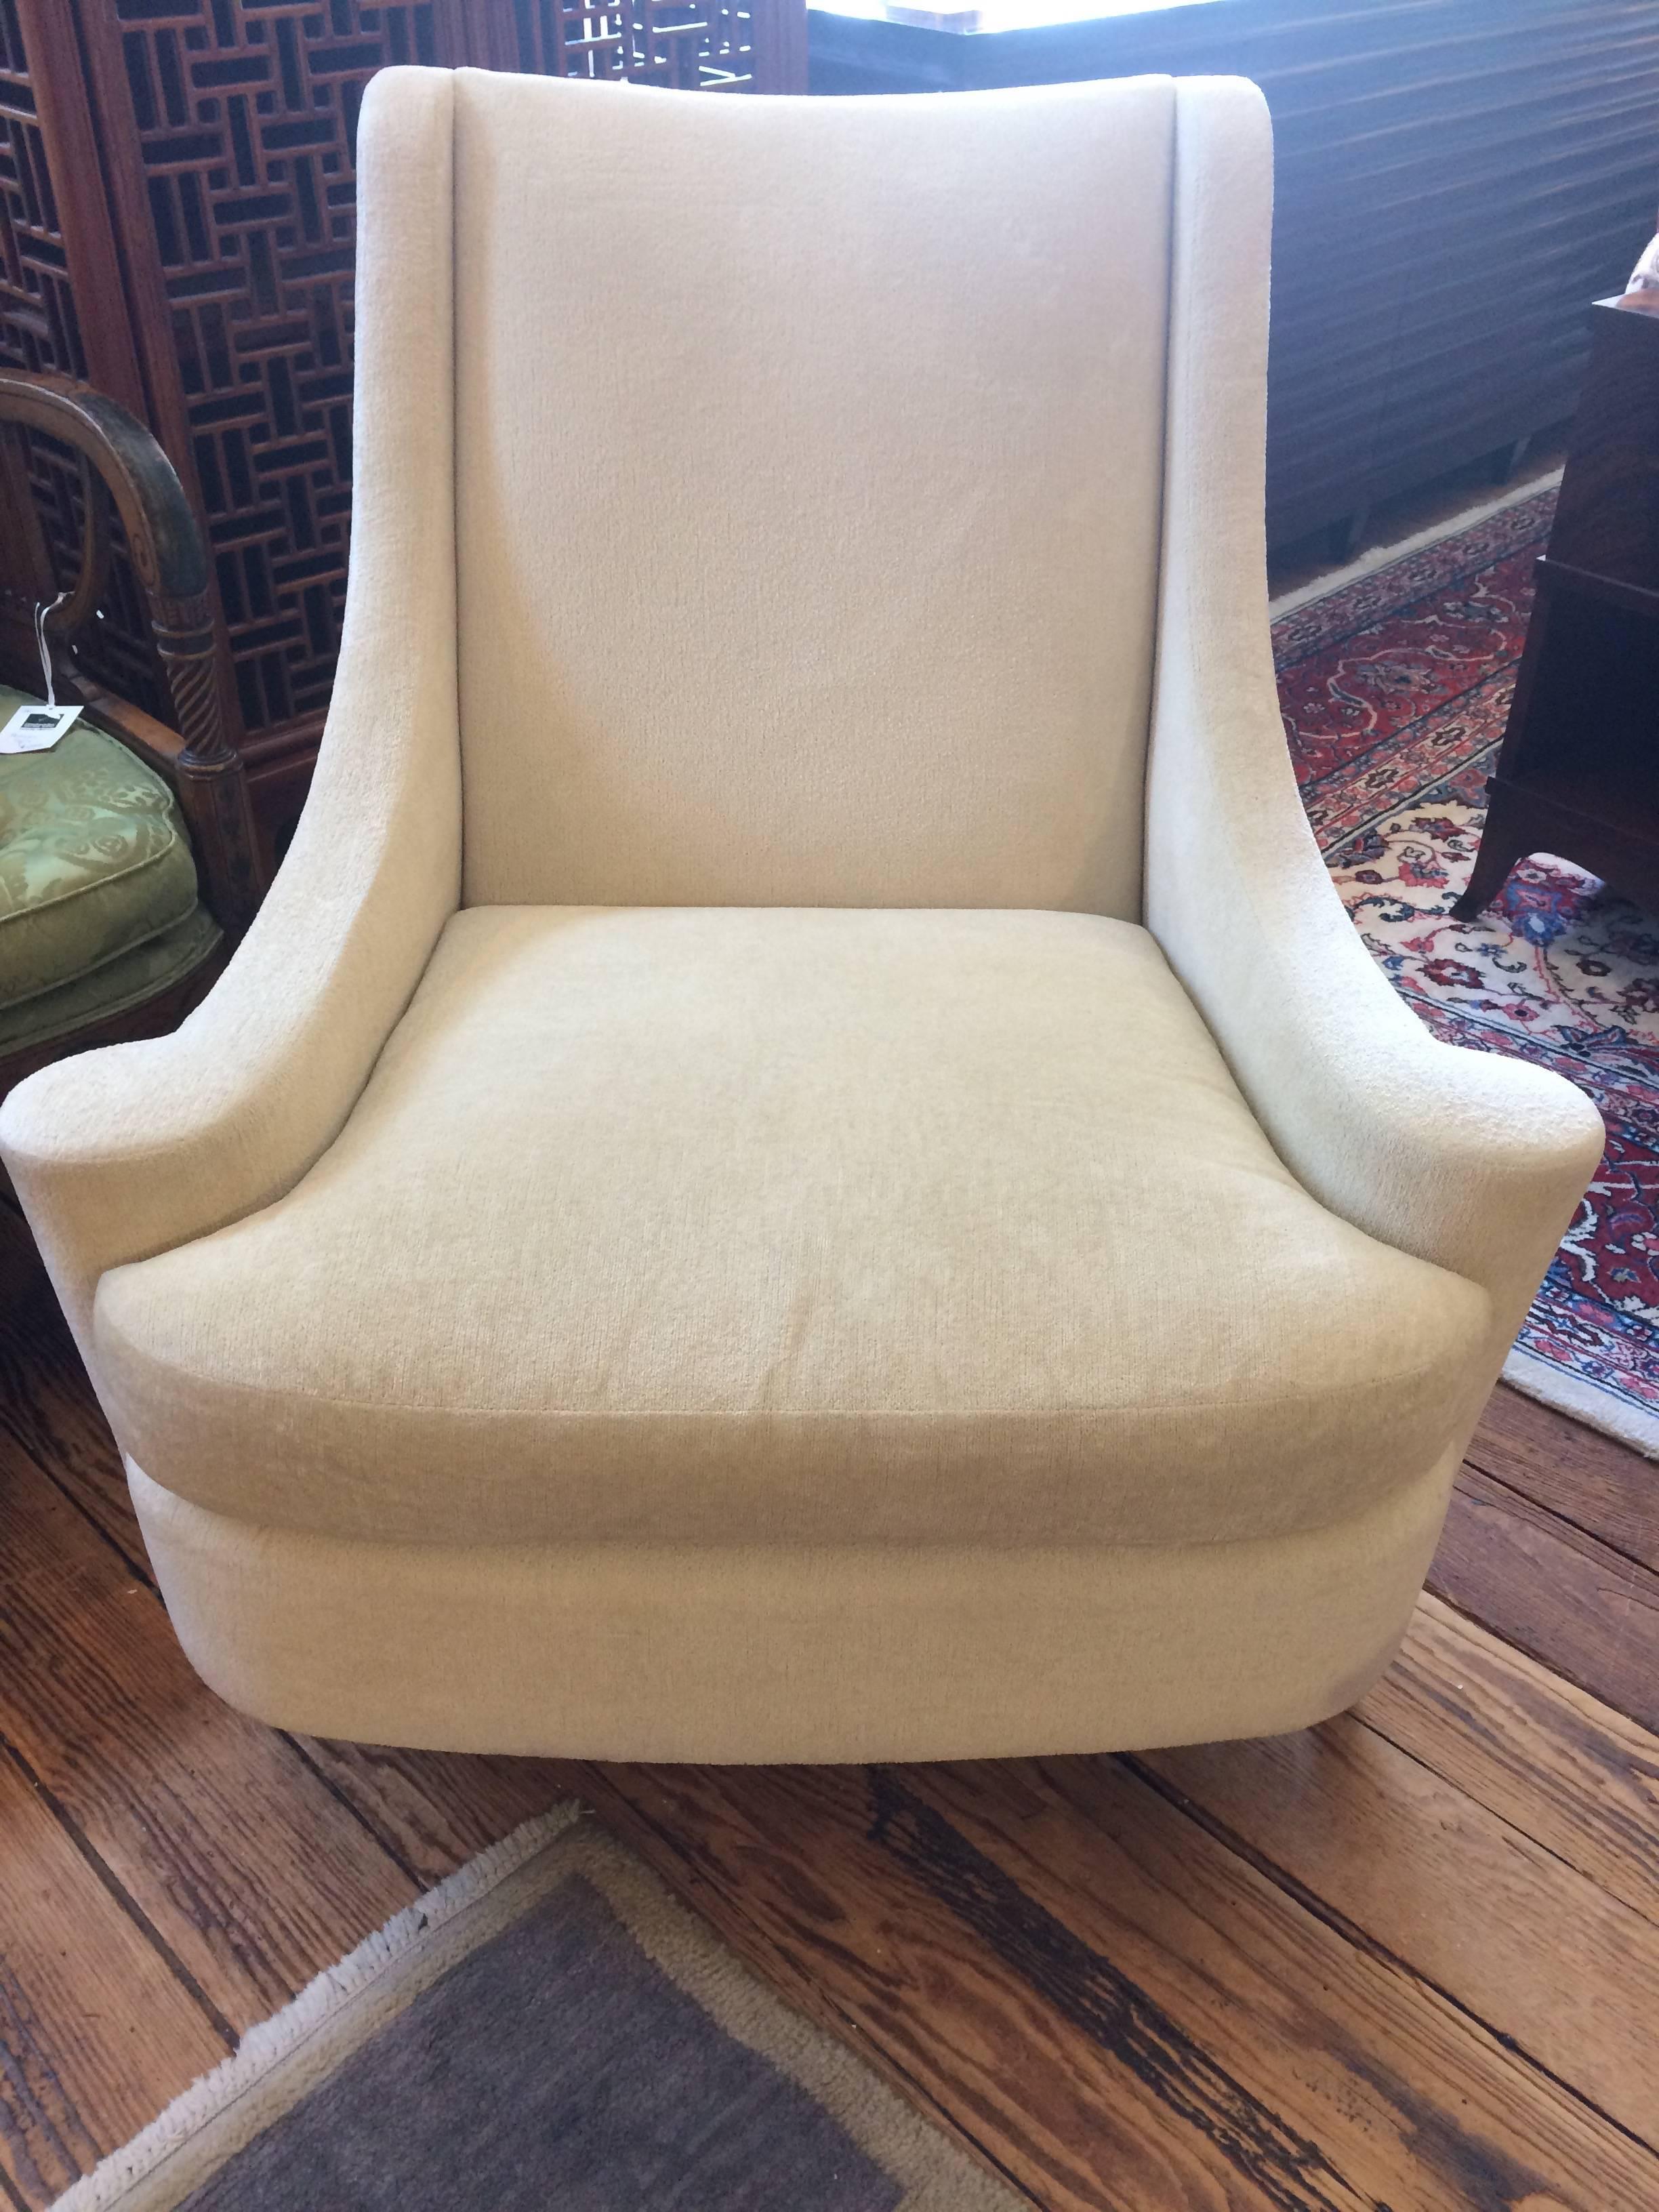 Wonderfully designed club chair called the Joan armchair by Barbara Barry having arms and seat that are wider than the top, very stylized and super comfortable. The back is tight sculpted while the seat is removeable and filled with duck